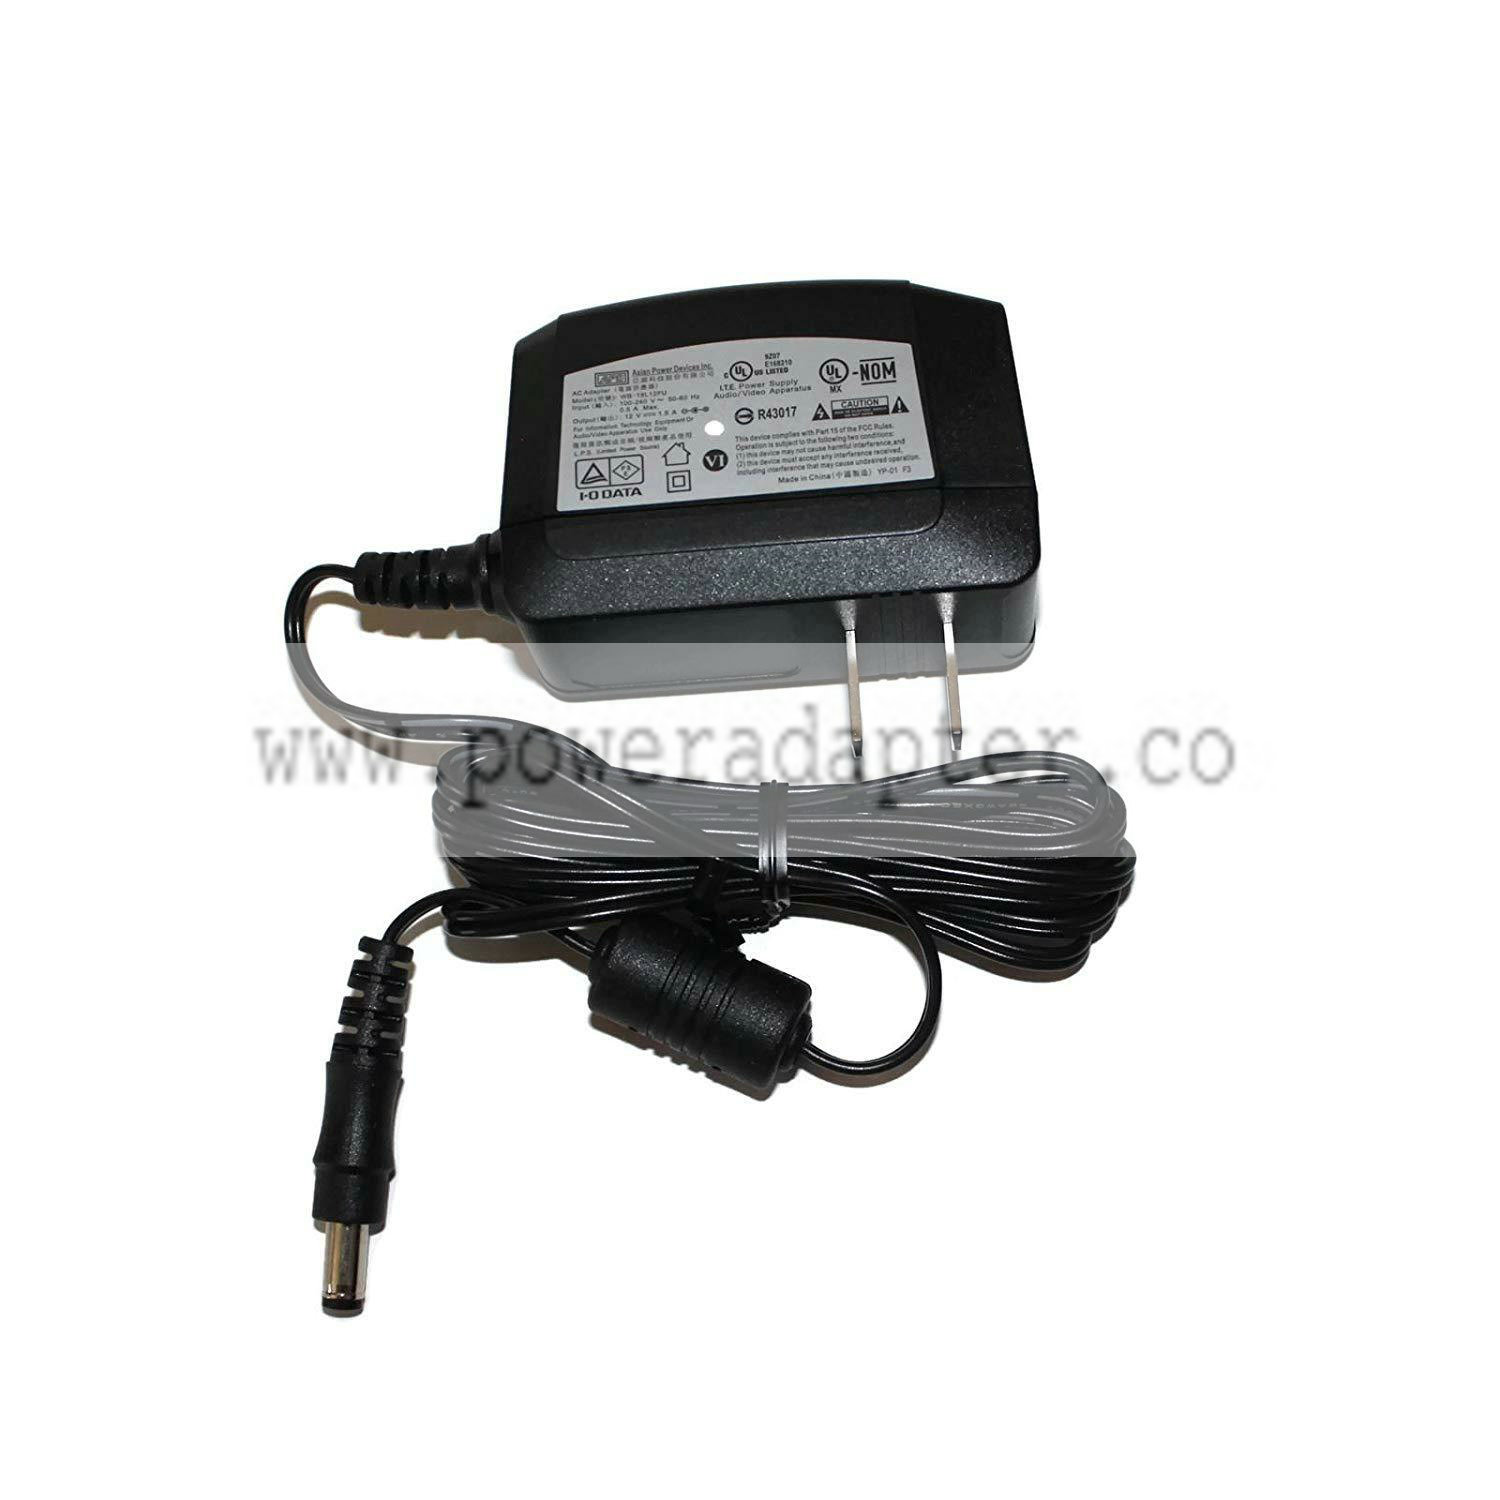 APD AC Adapter 12V 1.5A 120-240V 50-60Hz for WD / Seagate HDD - WB-18L12FU Model: WB-18L12FU Output Voltage: 12 V Ty